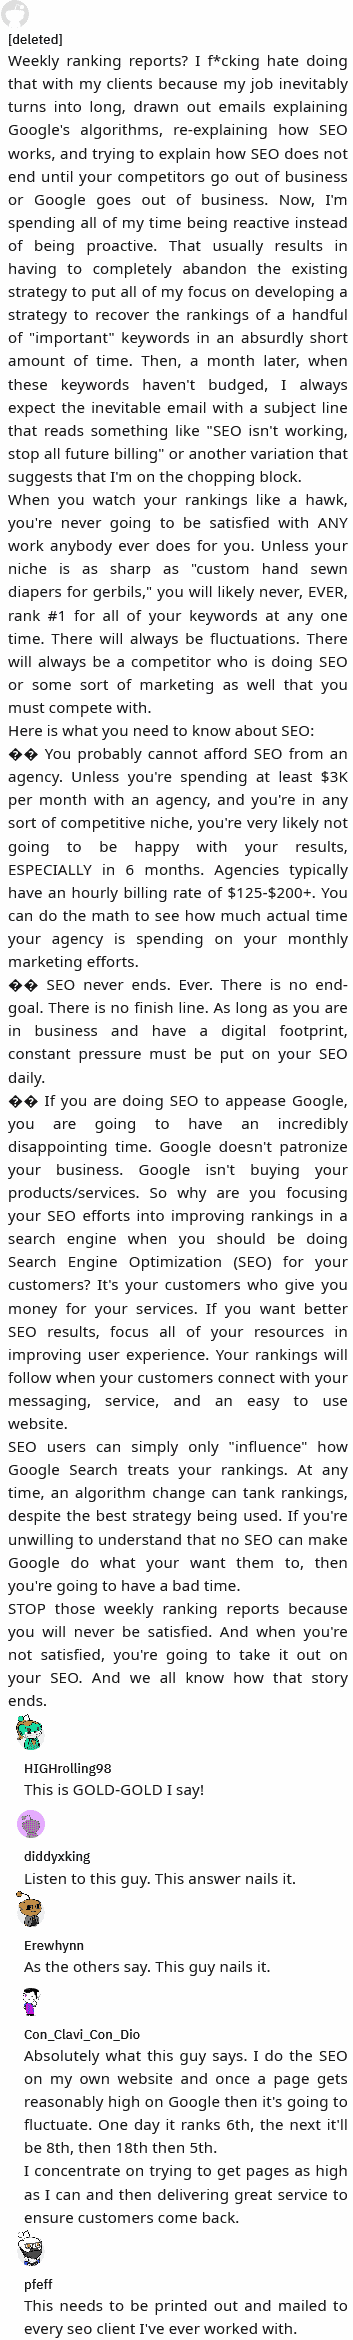 i want to cut an seo agency its almost 6 months not any increase in my organic traffic